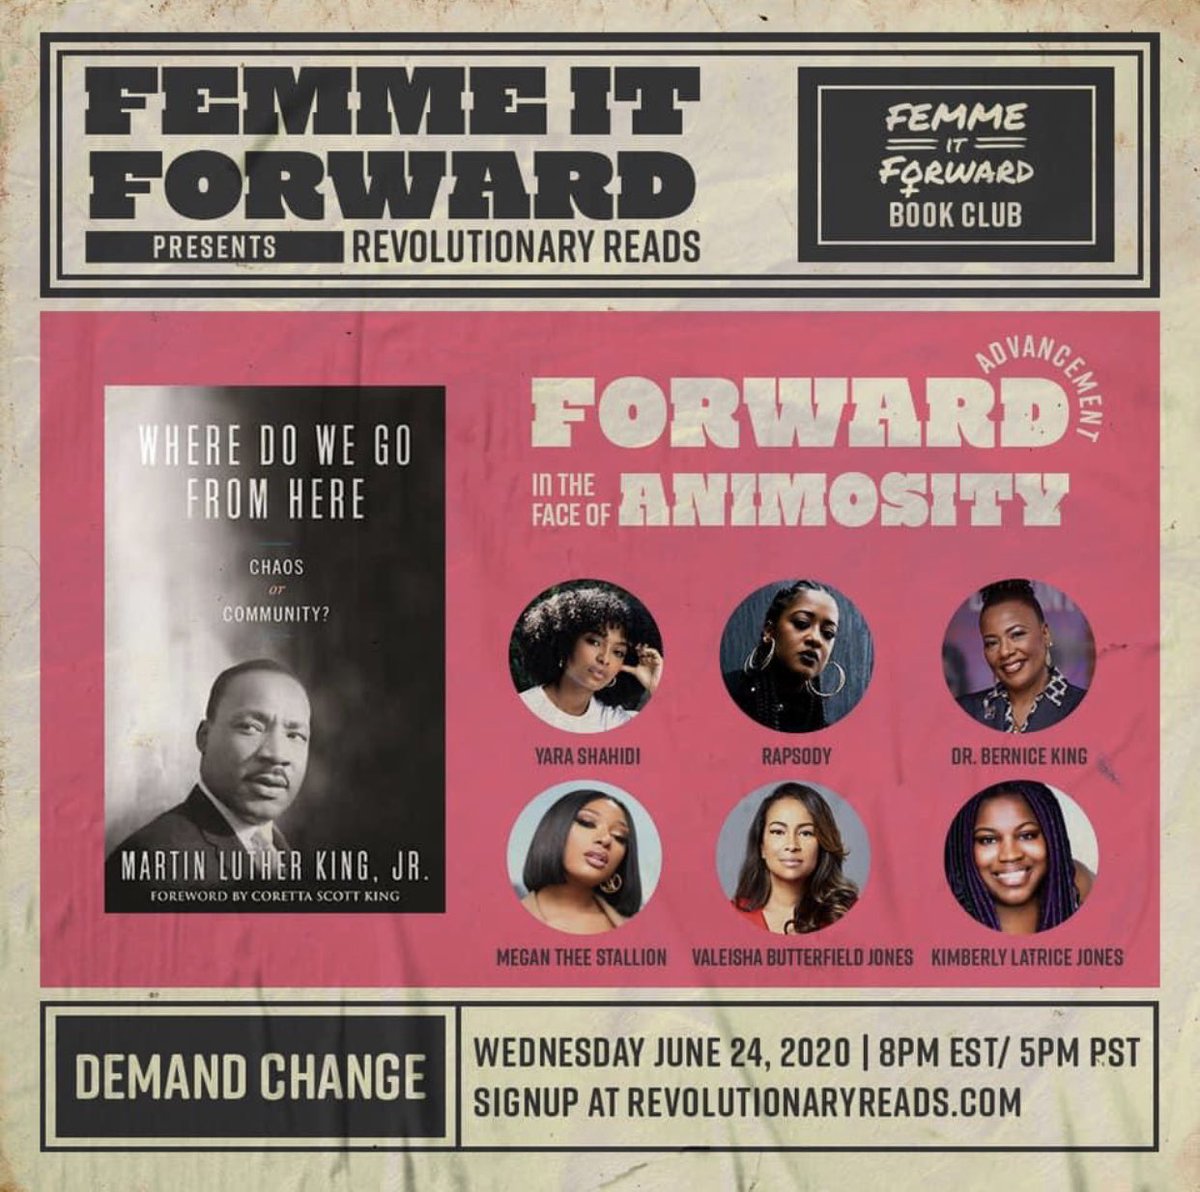 @FemmitForward presents #RevolutionaryReads: a book club for us by us with reads to fuel the revolution. This is a safe space to let our hair down and spark discussions that will help us in the current fight for justice and equality. #FemmeitForward #JuneBook